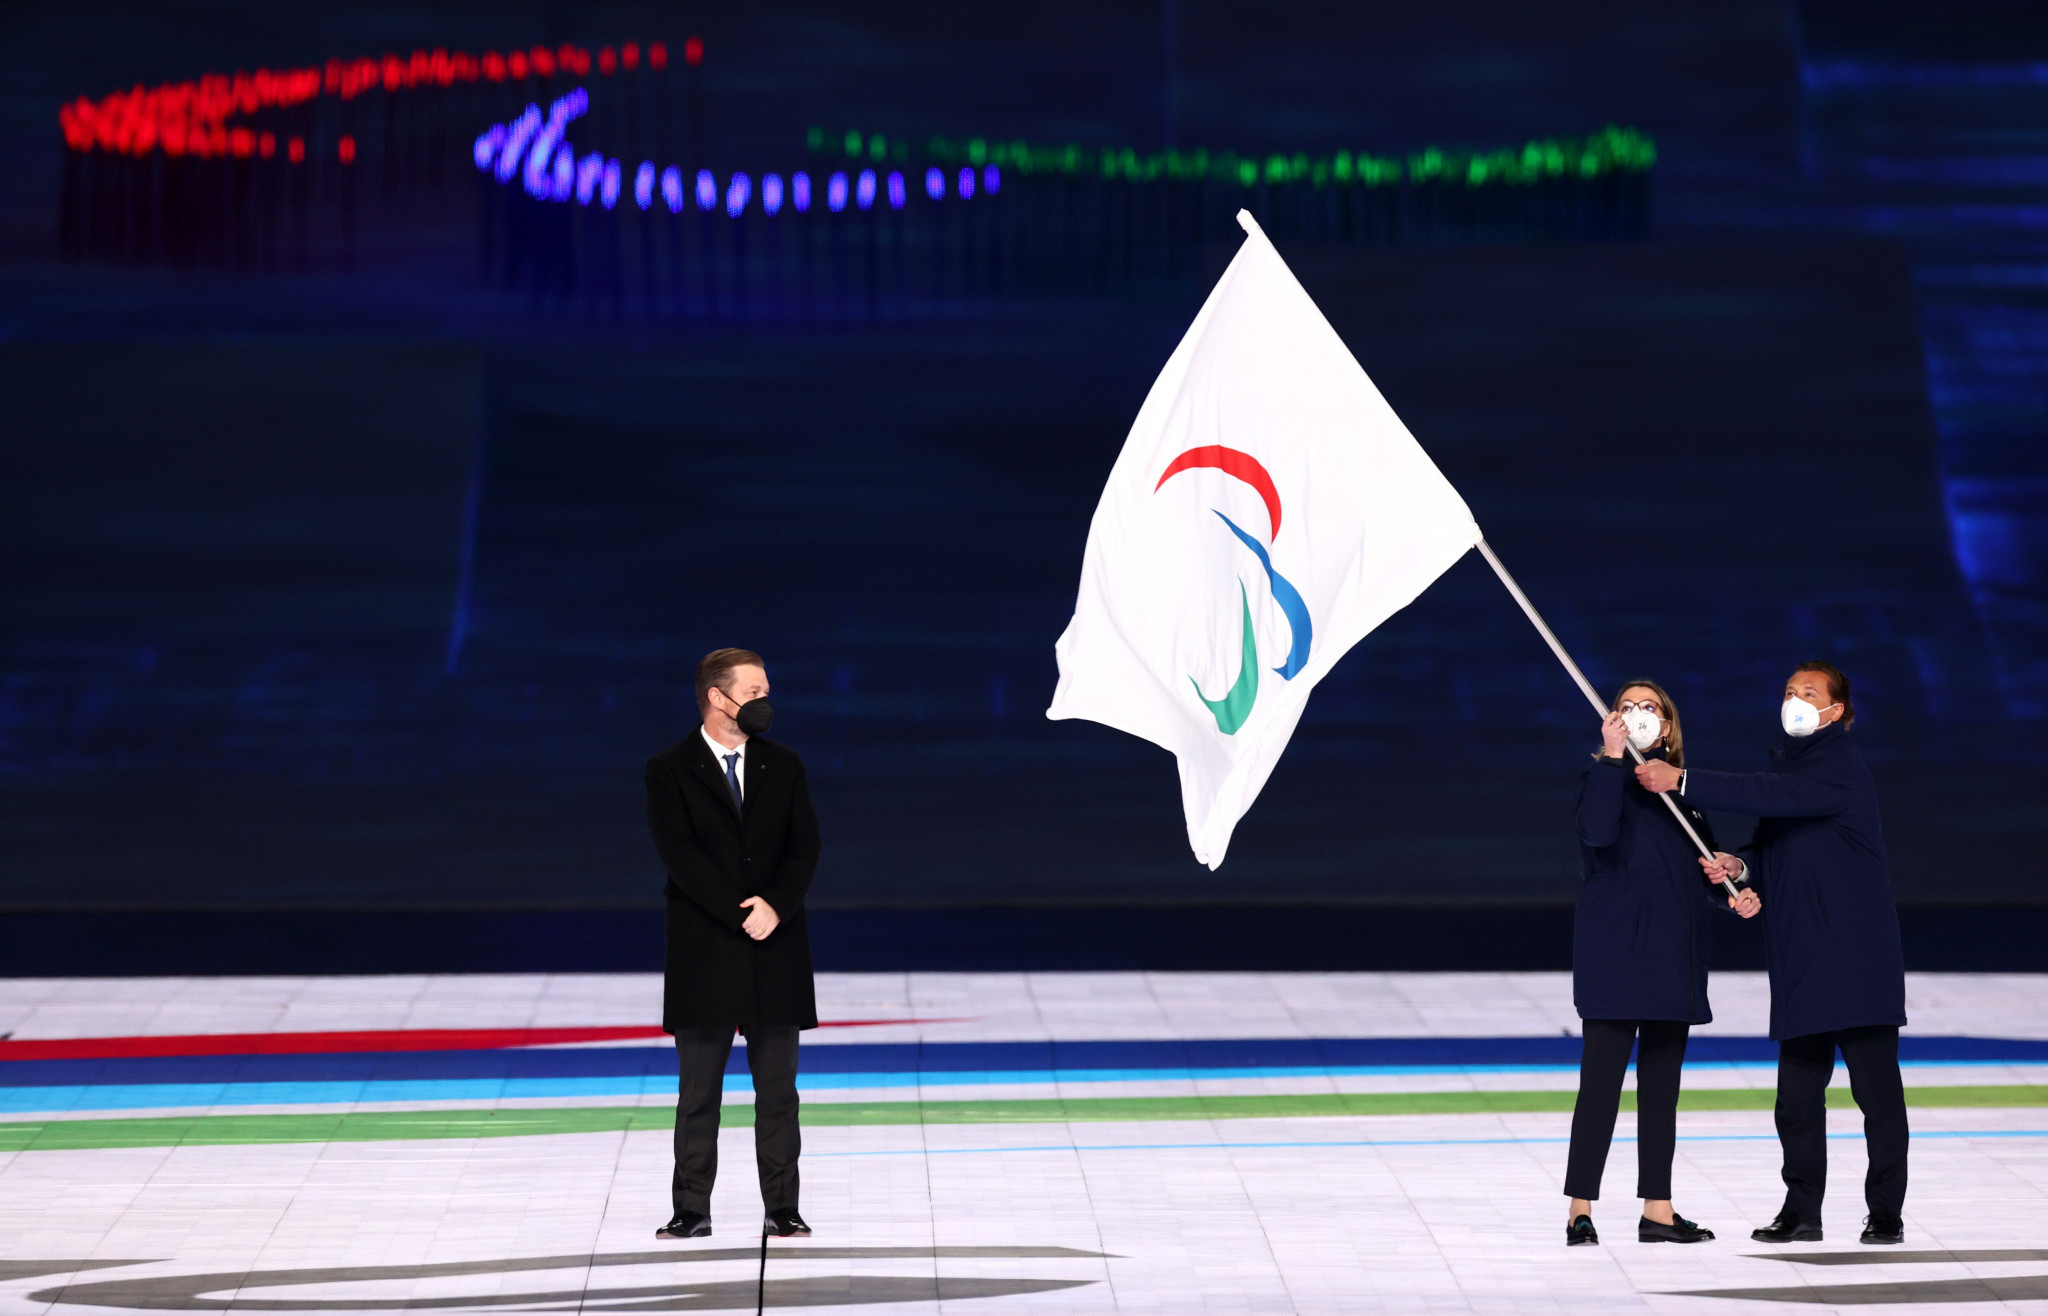 insidethegames is reporting LIVE on the Closing Ceremony of the Beijing 2022 Winter Paralympics